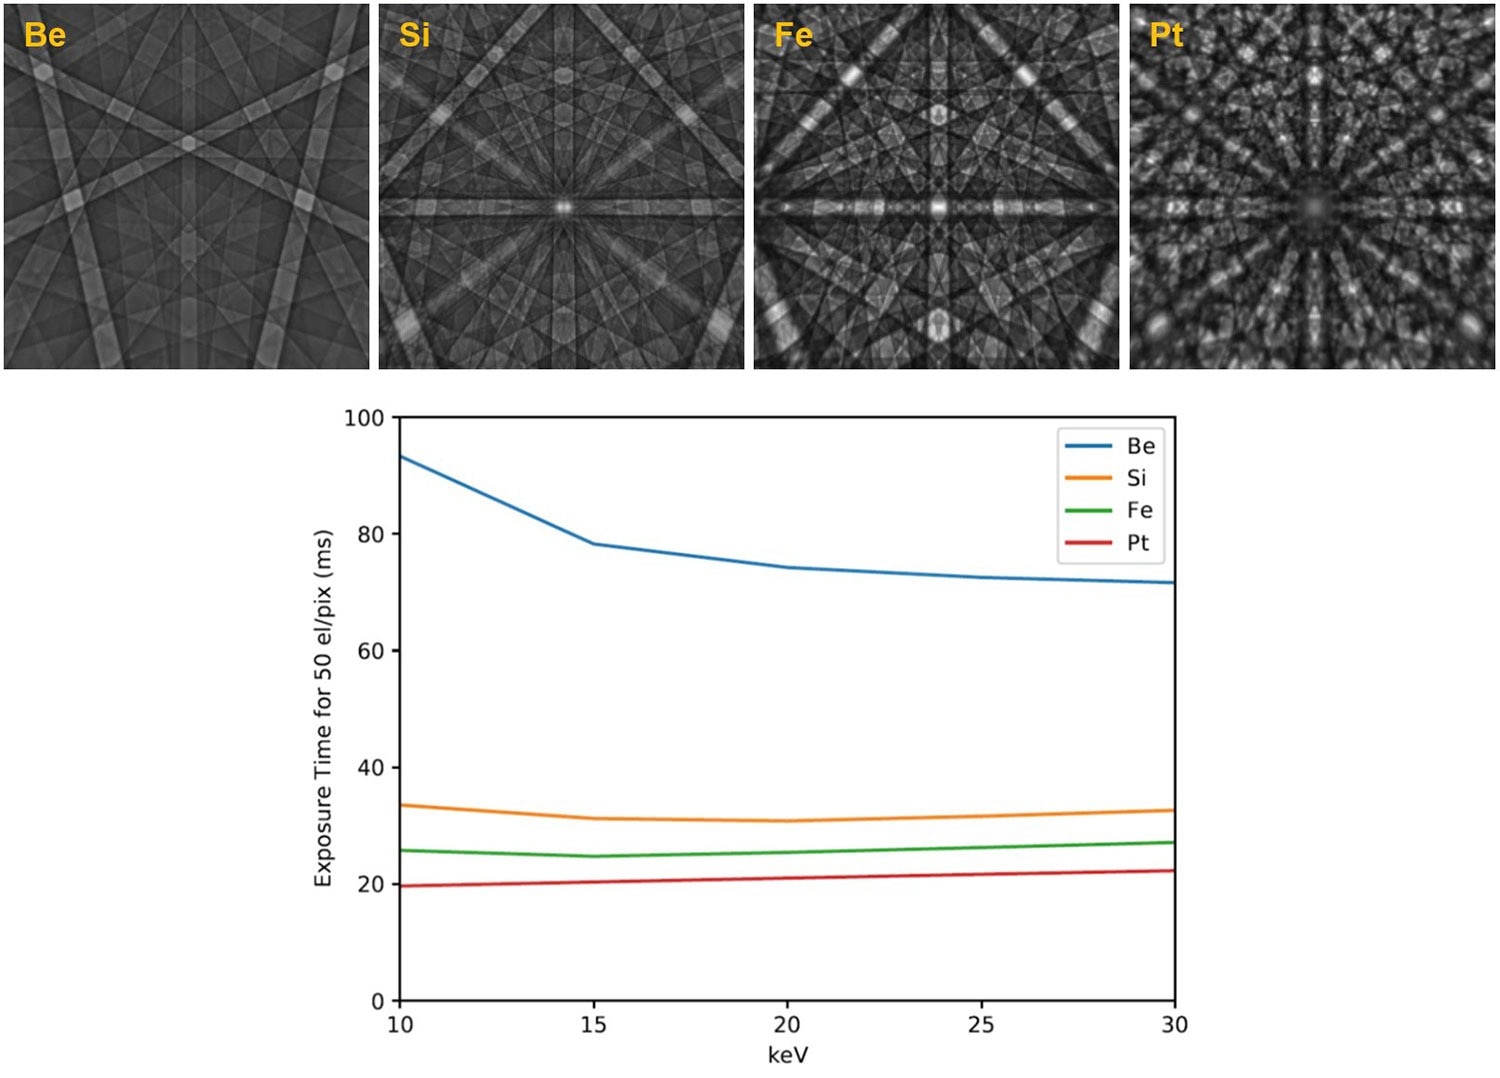 Simulated EBSD patterns and chart illustrating the different diffracted intensities and required exposure time to reach an average of 50 diffracted electrons per pixel using 100 pA beam current at different kV - assuming ideal crystal, surface, and detection efficiency.